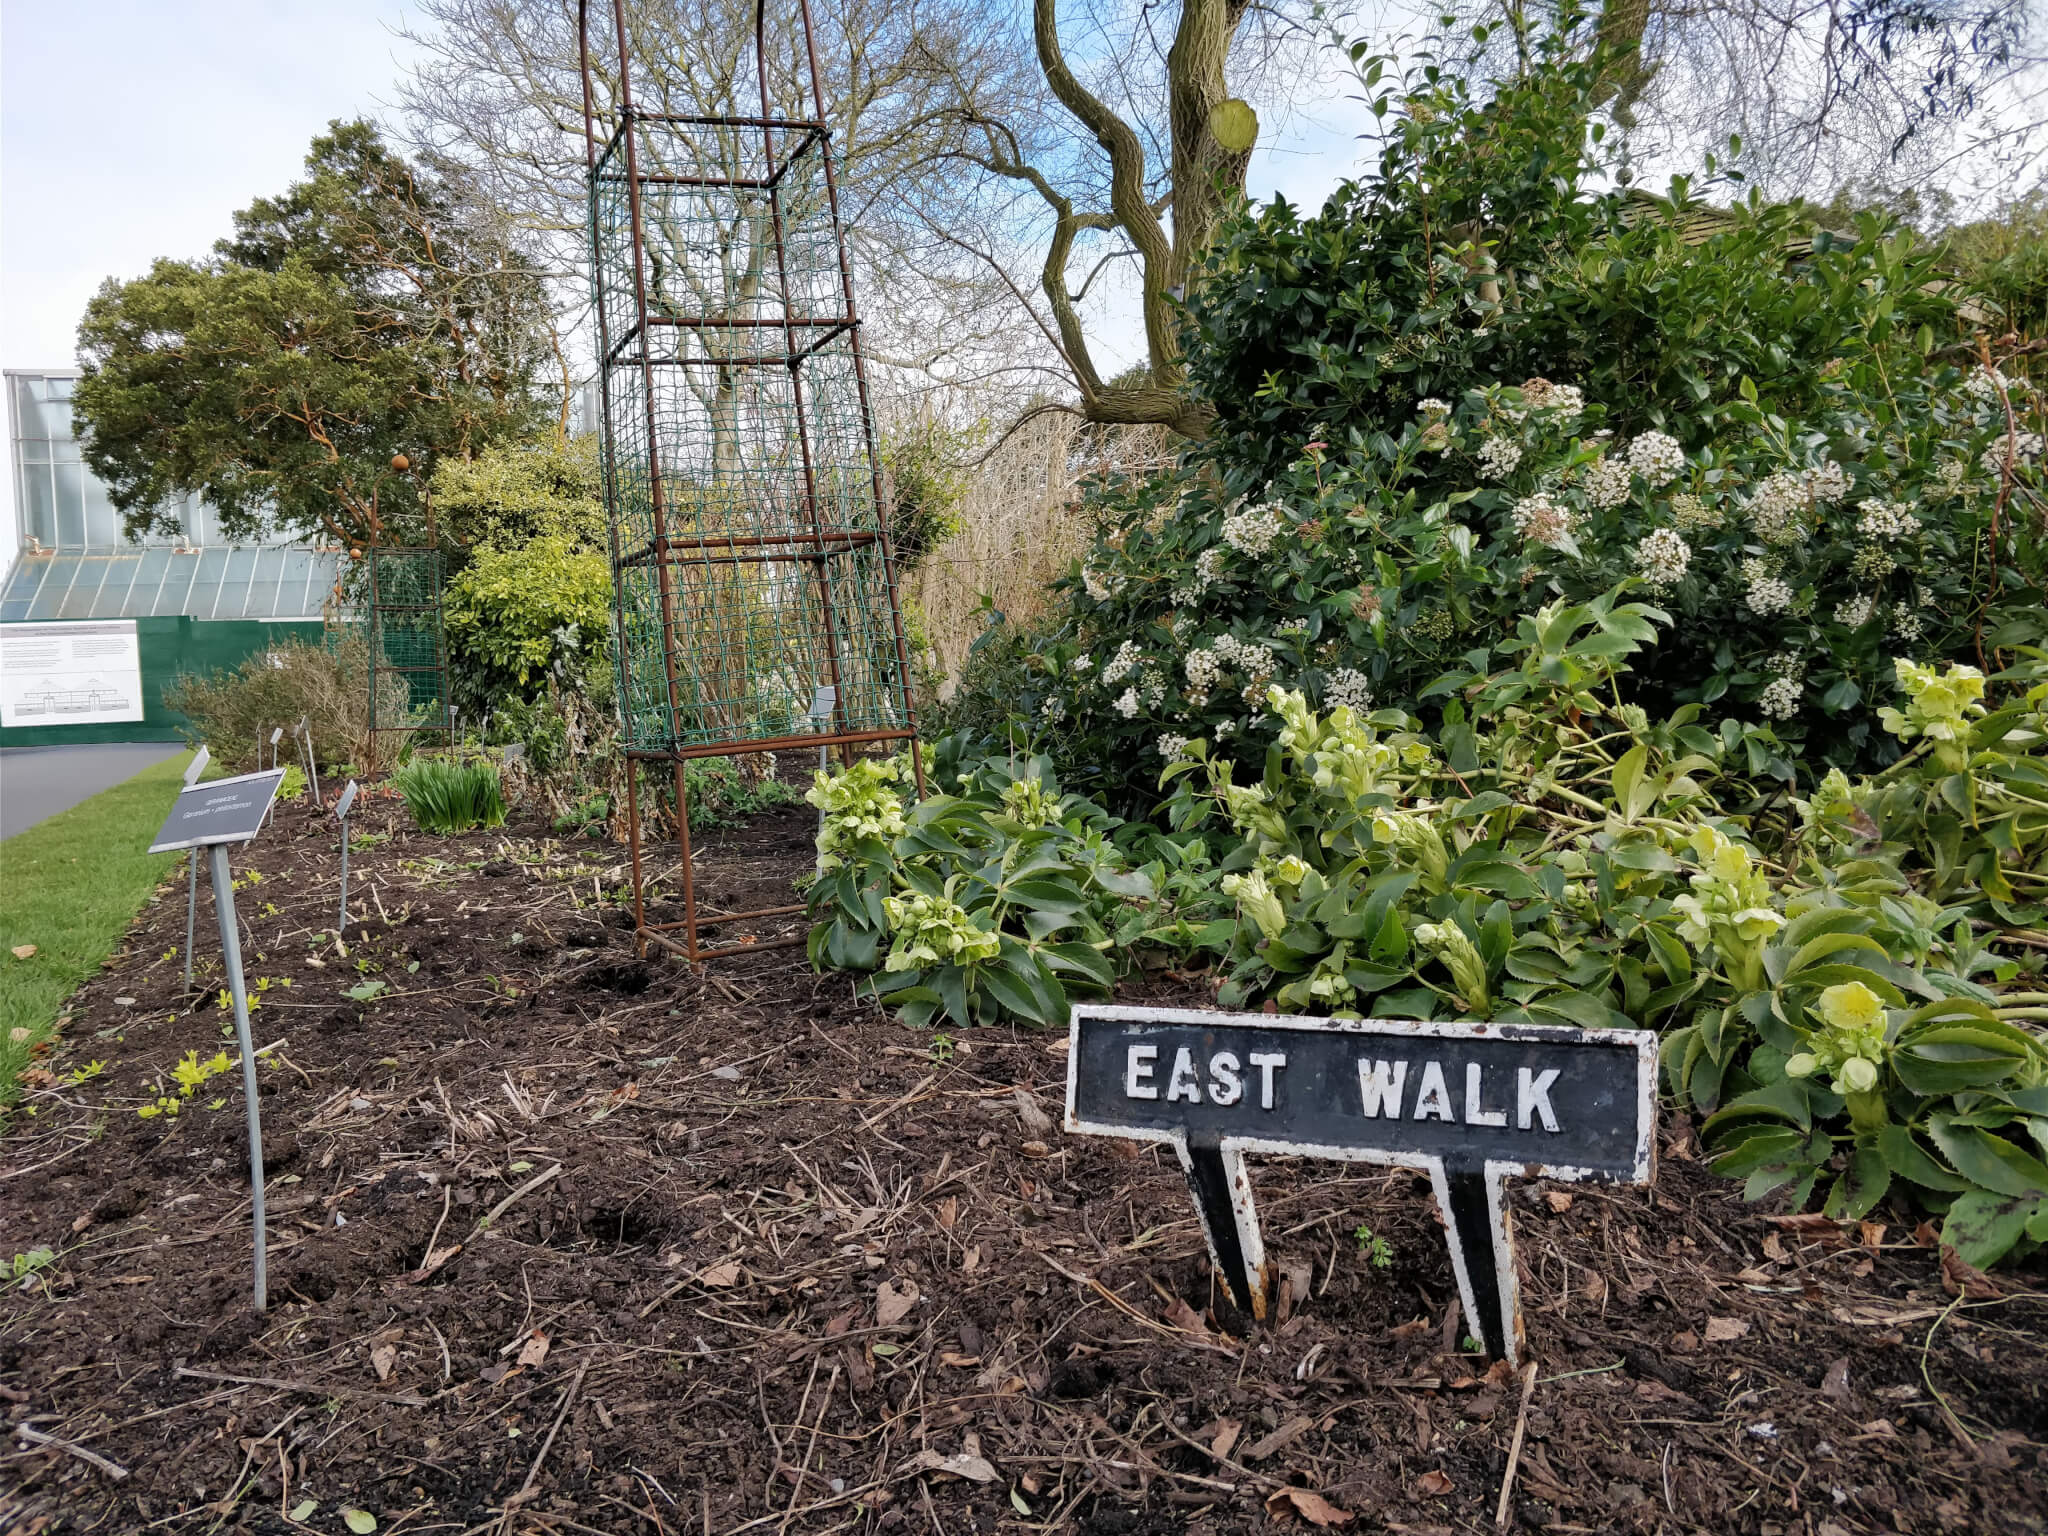 East Walk, leading up to the entrance of the new Teagasc College of Amenity Horticulture at the National Botanic Gardens. Photo: Peter Stears.